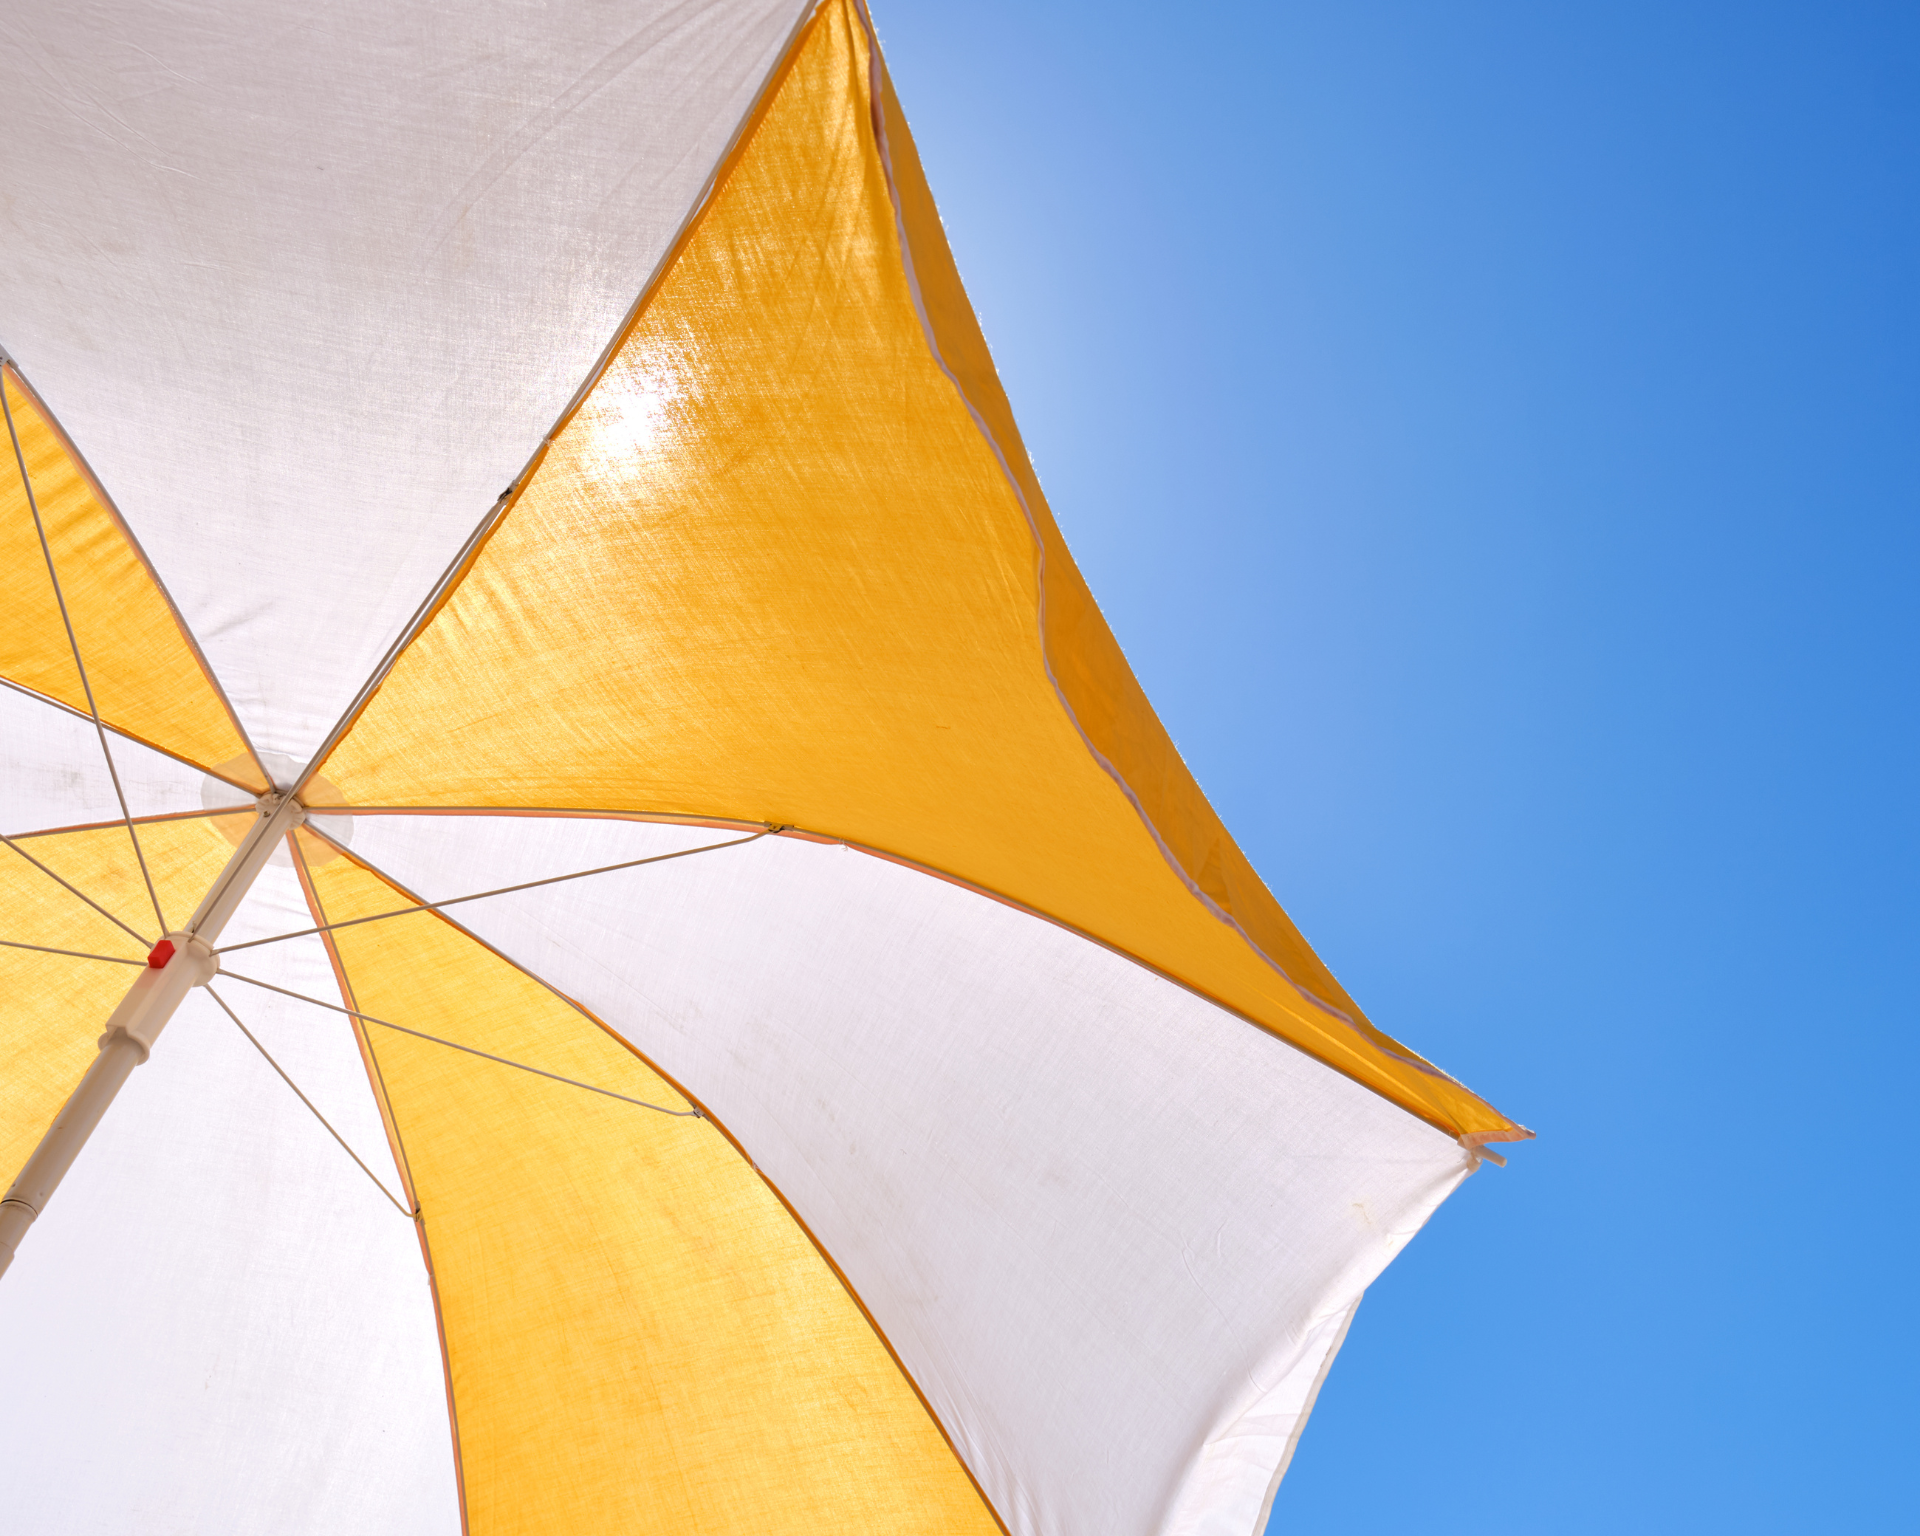 Yellow and white umbrella on a blue sky for protection from the sun on the beach